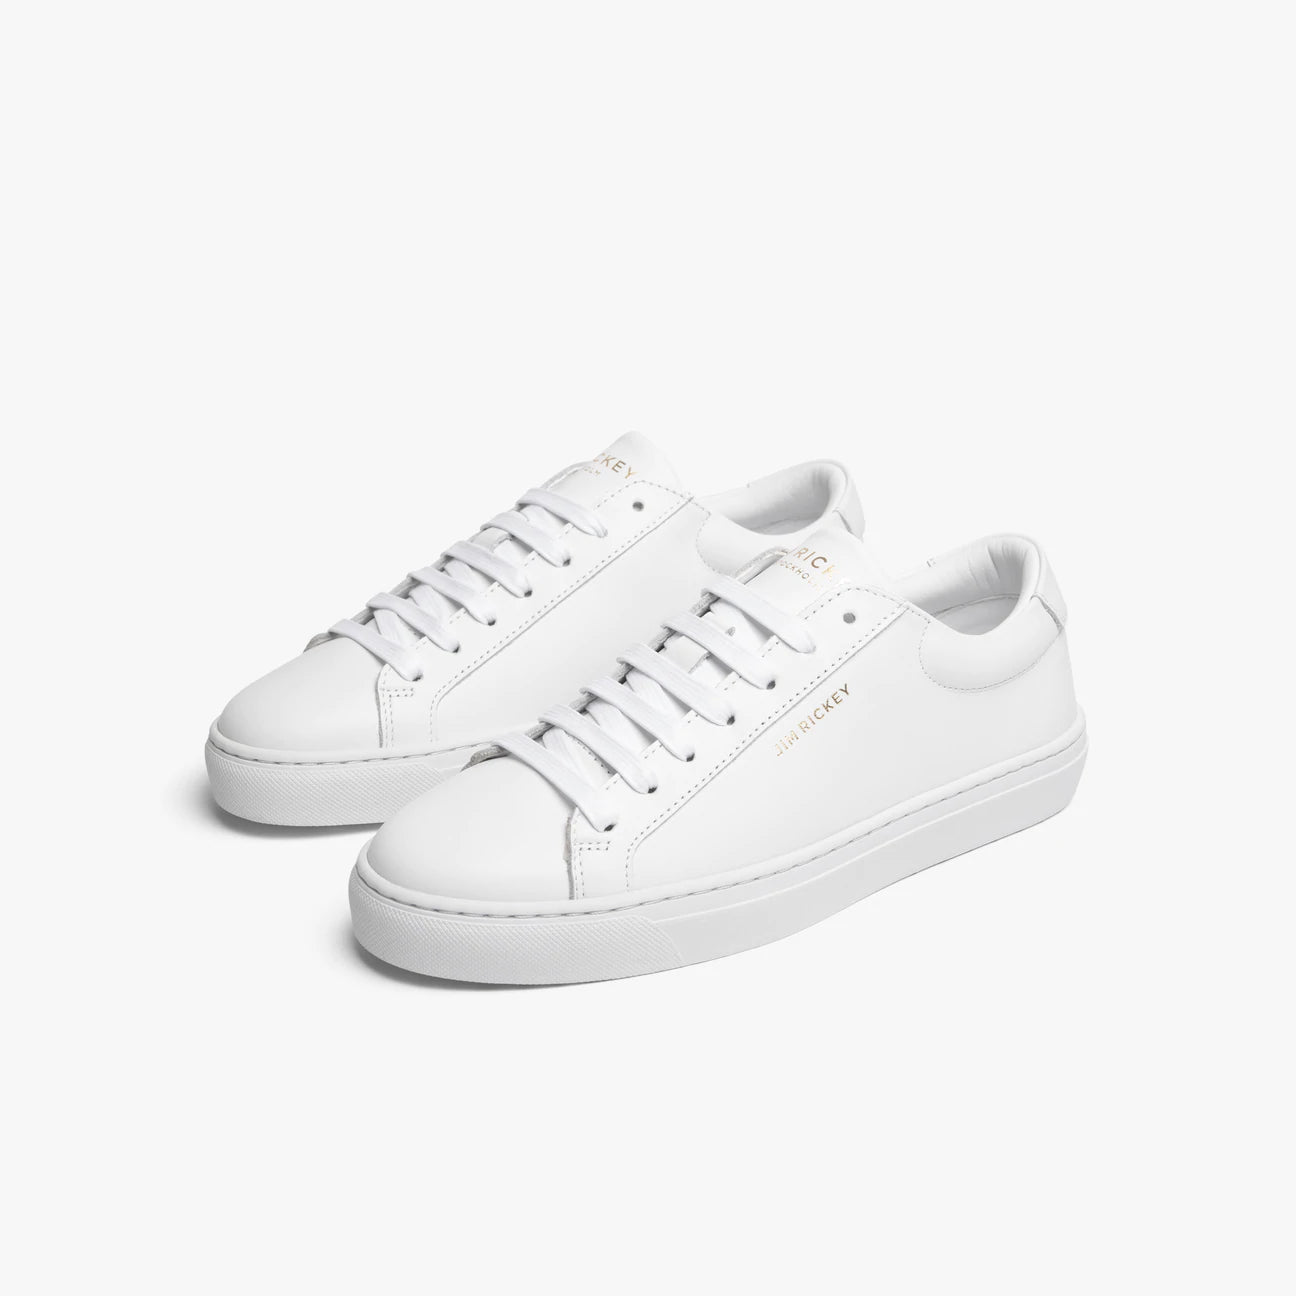 Spin leather sneakers (wht)